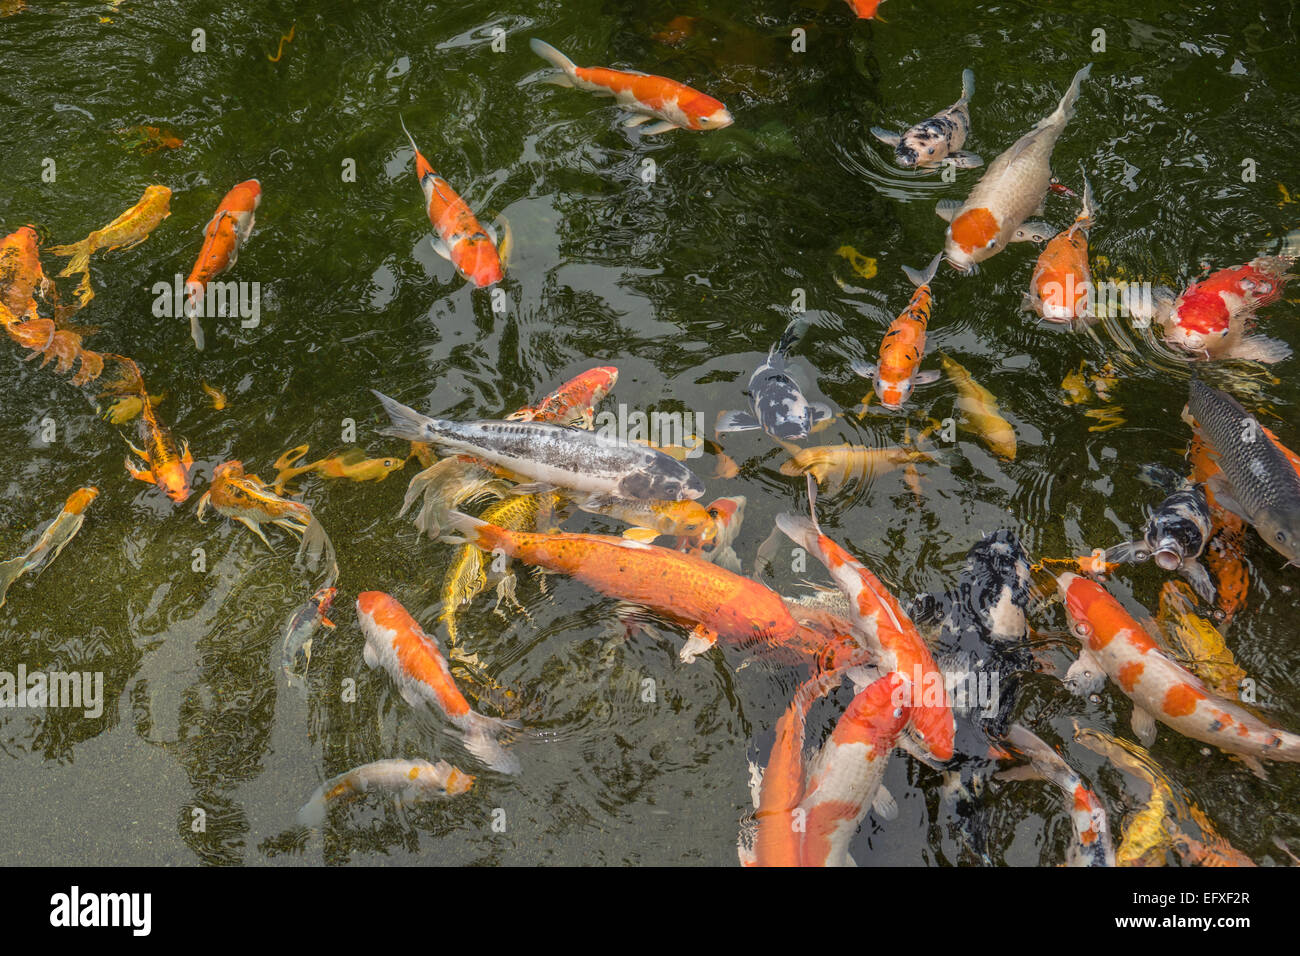 Singapore, Gardens by the Bay, pool of Butterfly Koi fish Stock Photo